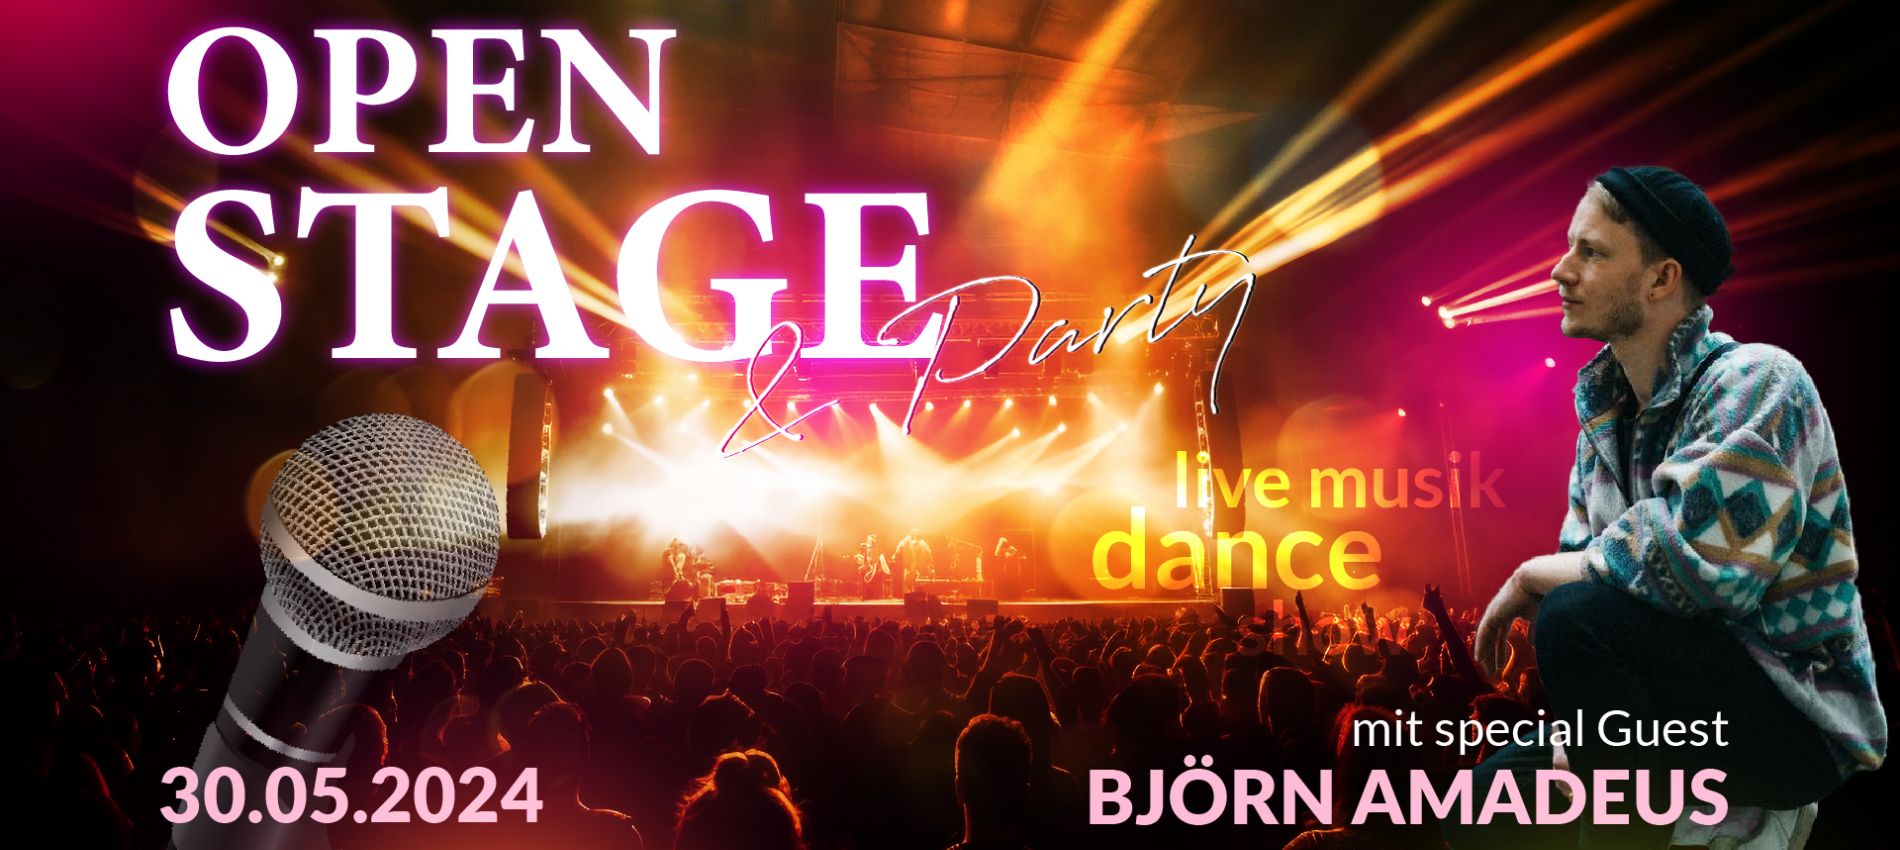 Open Stage & Party, 30.05.2024, mit special guest Björn Amadeus